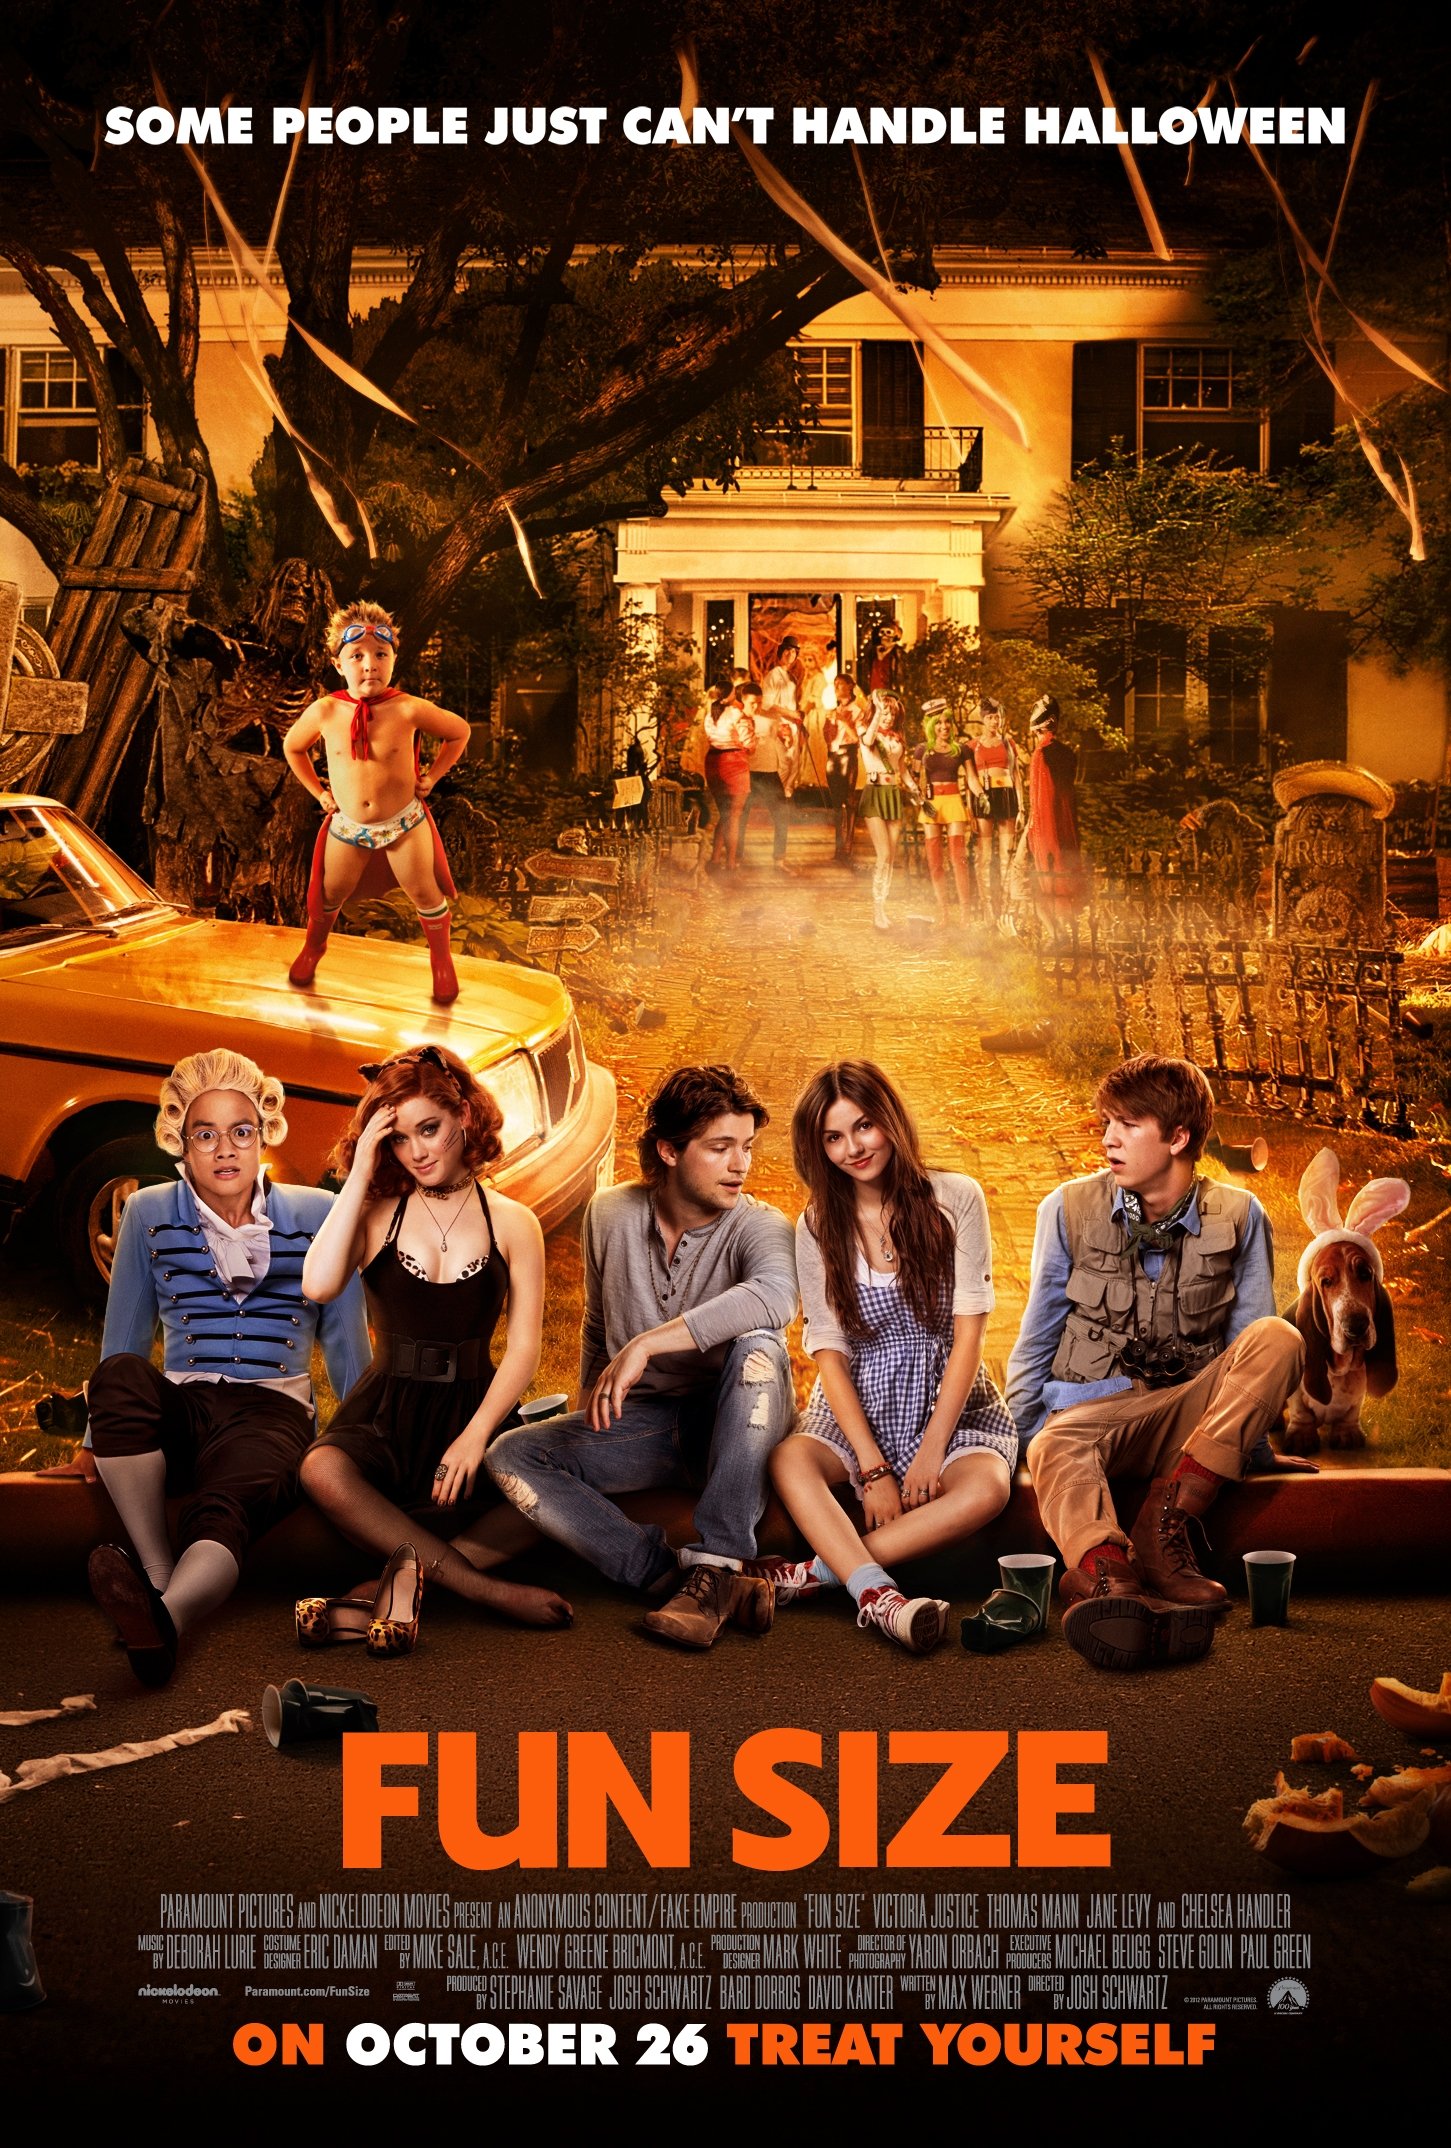 Poster of the movie Fun Size